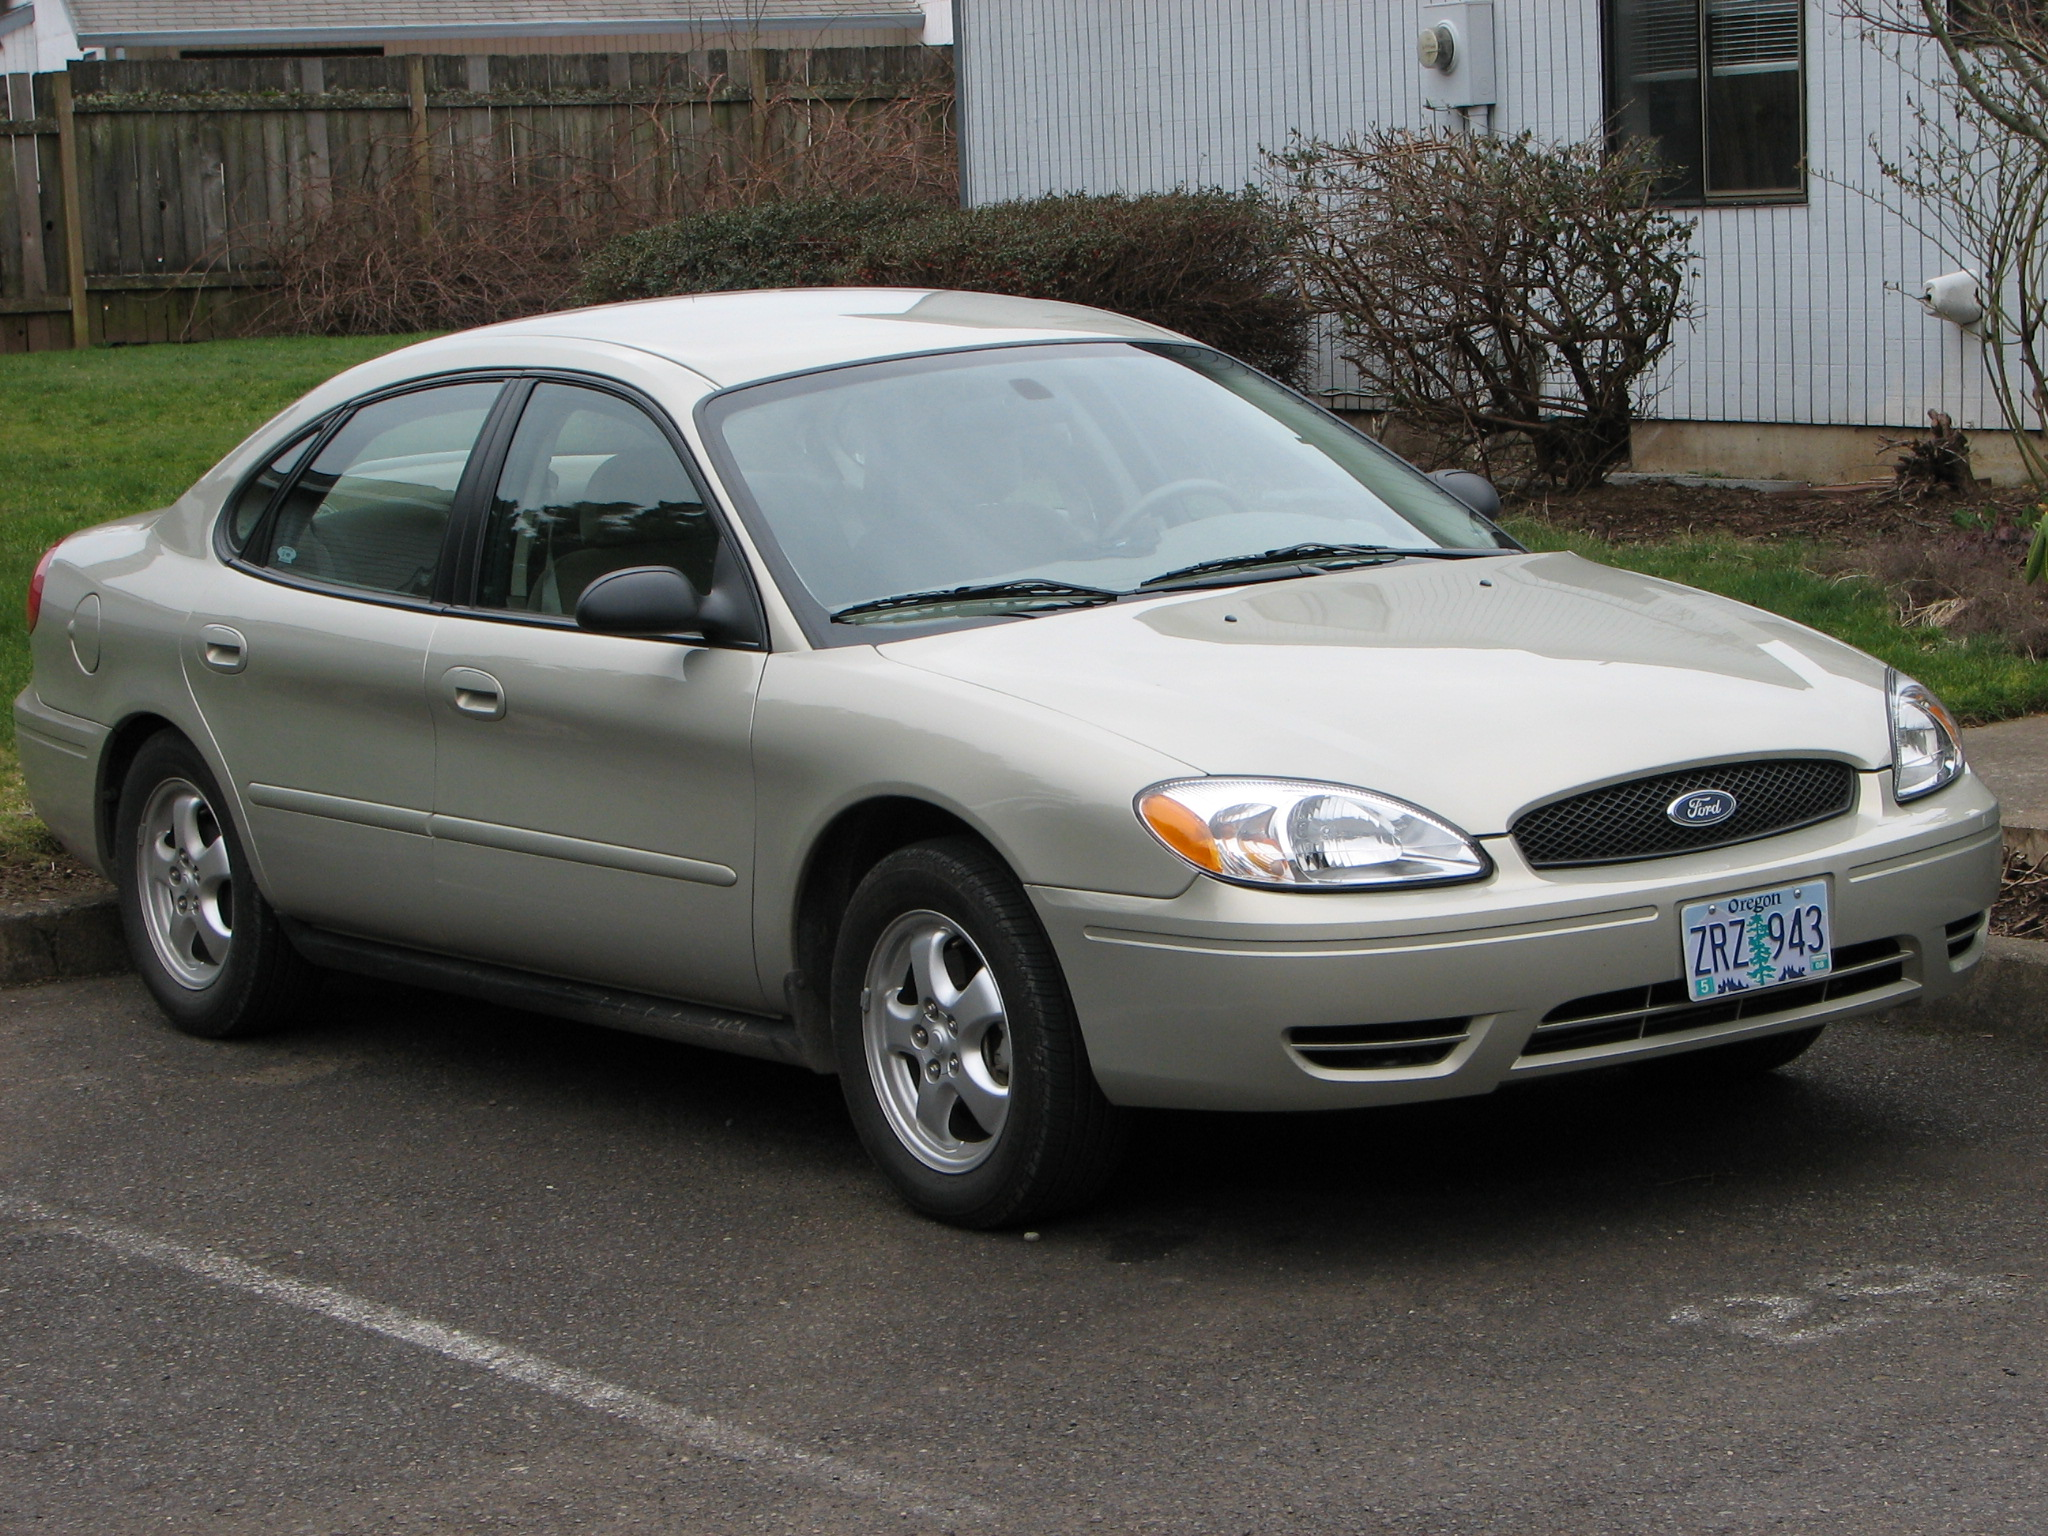 Silver Ford Taurus on a Parking Lot